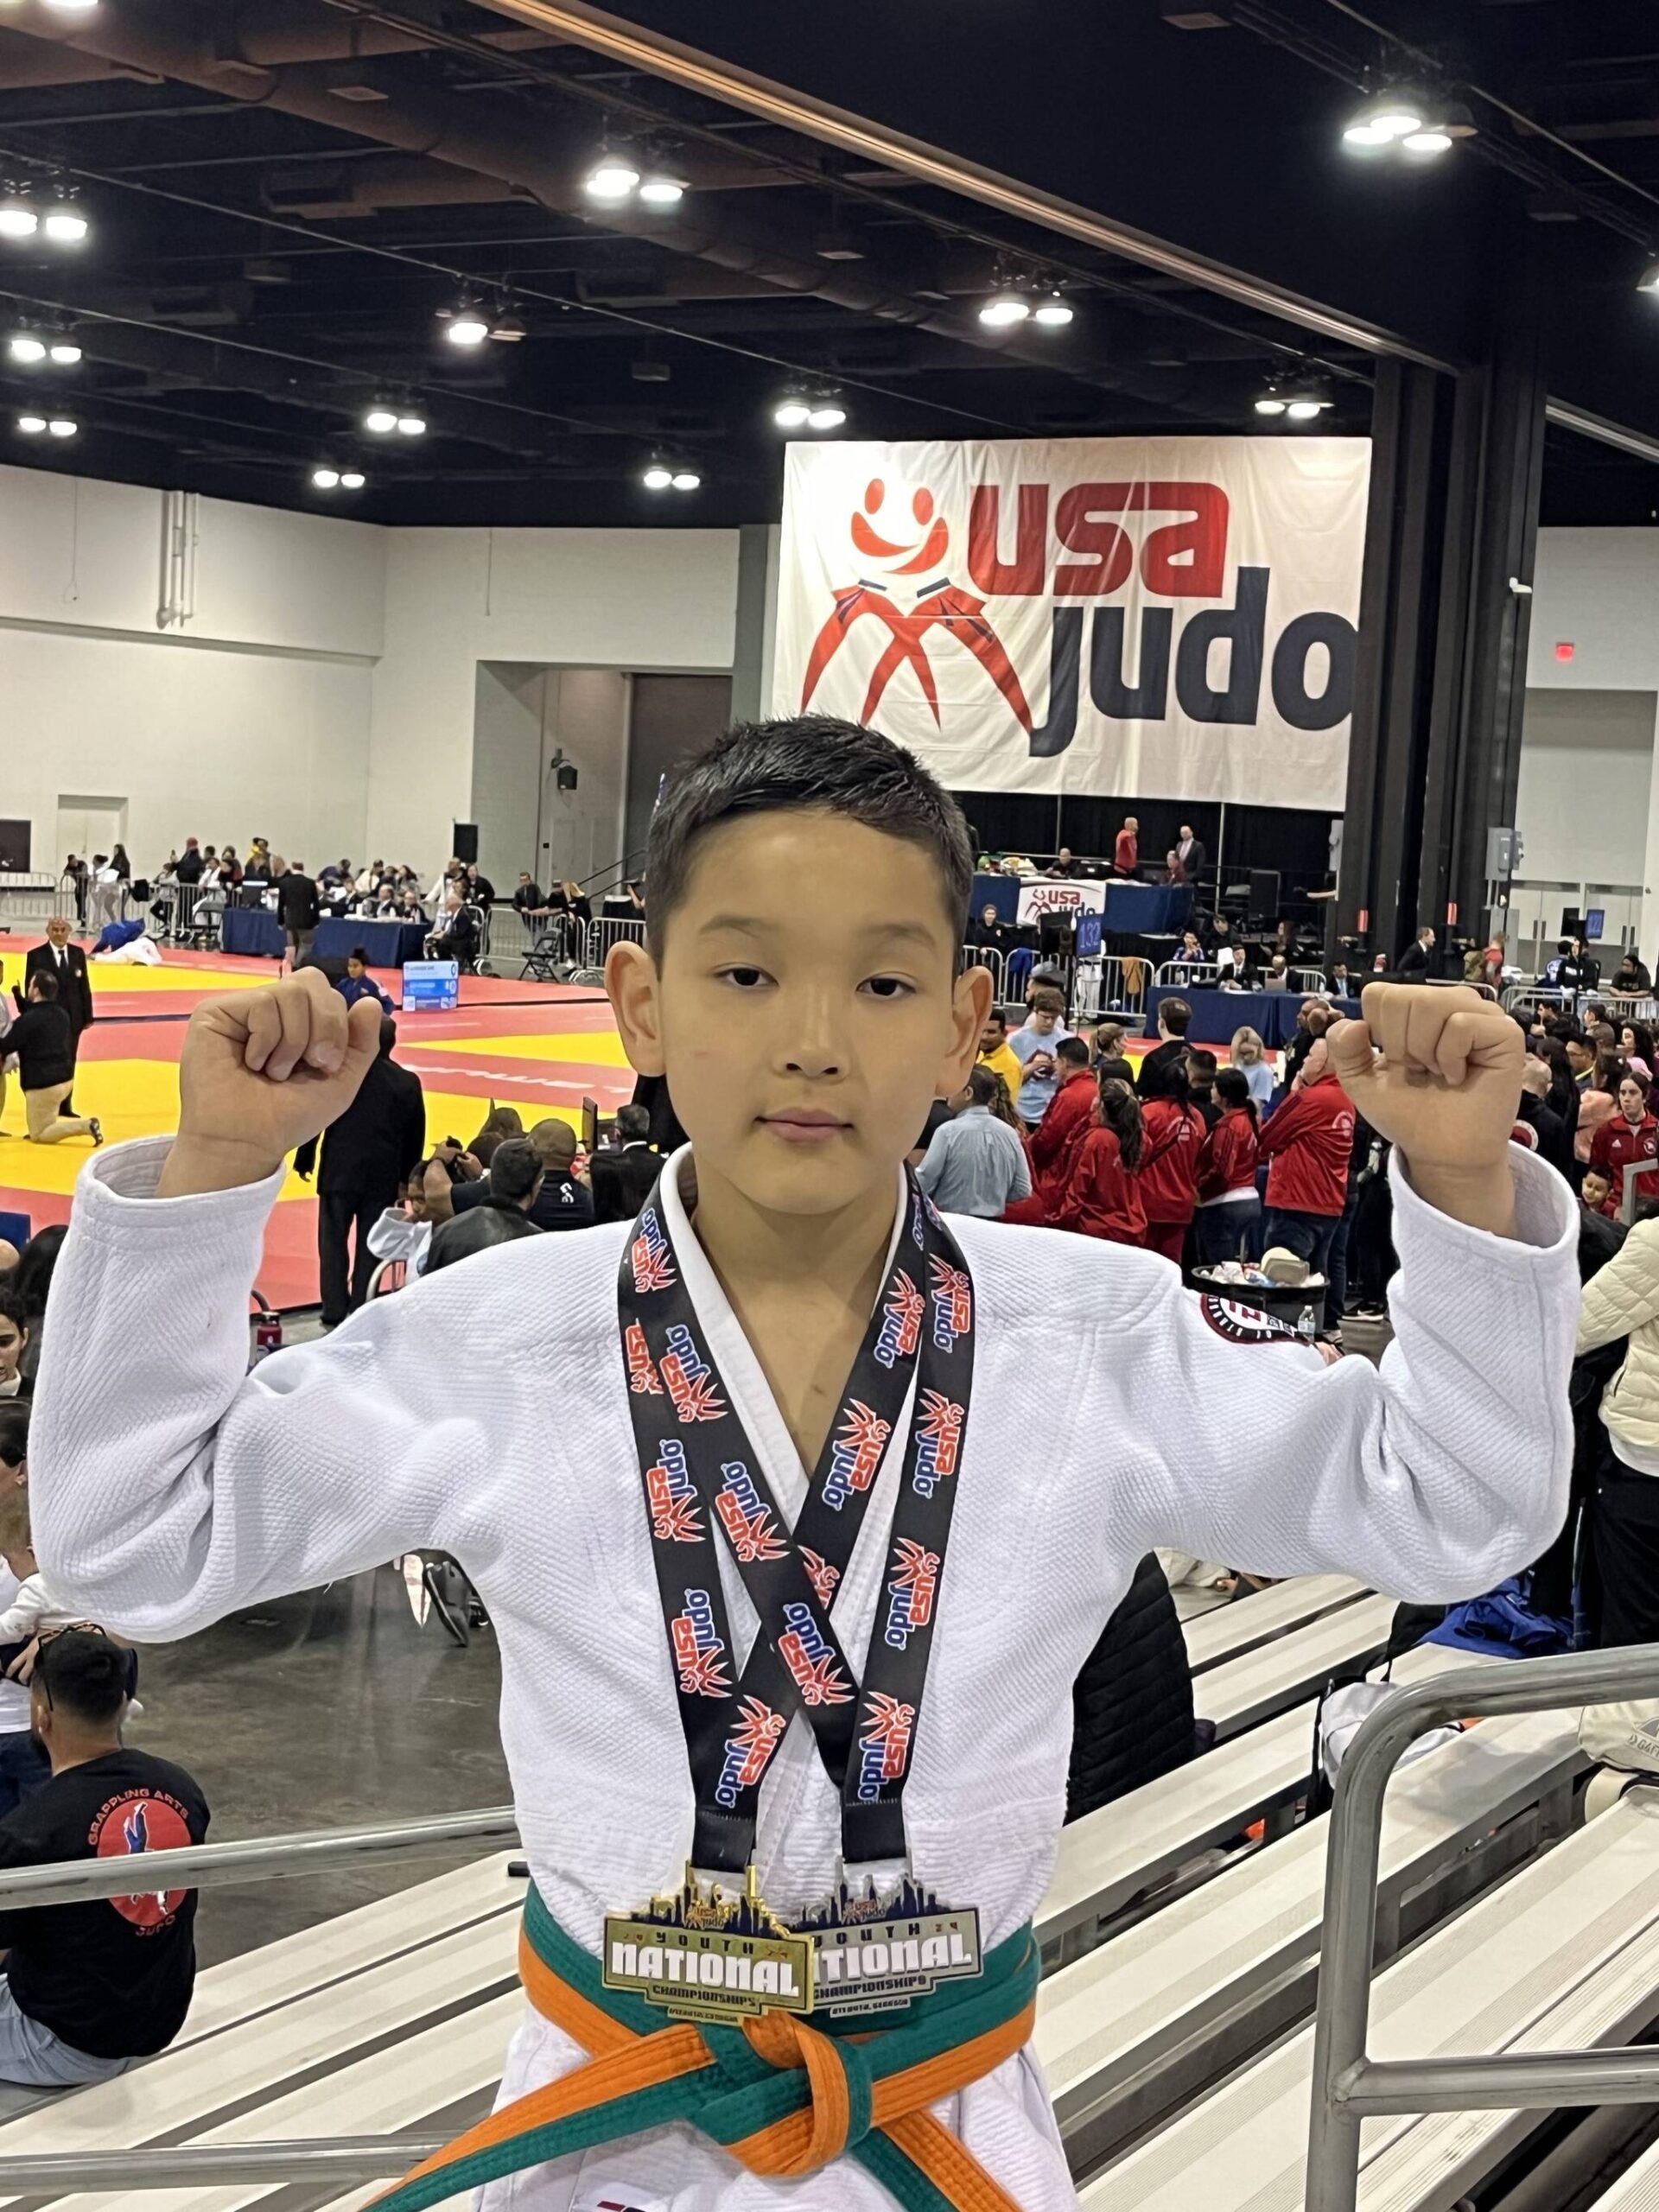 Northwood Elementary School student Mikhail Zulaev won two medals at the Junior National Judo Championships held in Atlanta, Georgia, from March 23-24. Mikhail notched a gold medal in the Boys 2015, Bantam 5 — up to 33 kg division. He garnered a silver medal in the Boys 2014, Bantam 6 — up to 31 kg category. Courtesy photo